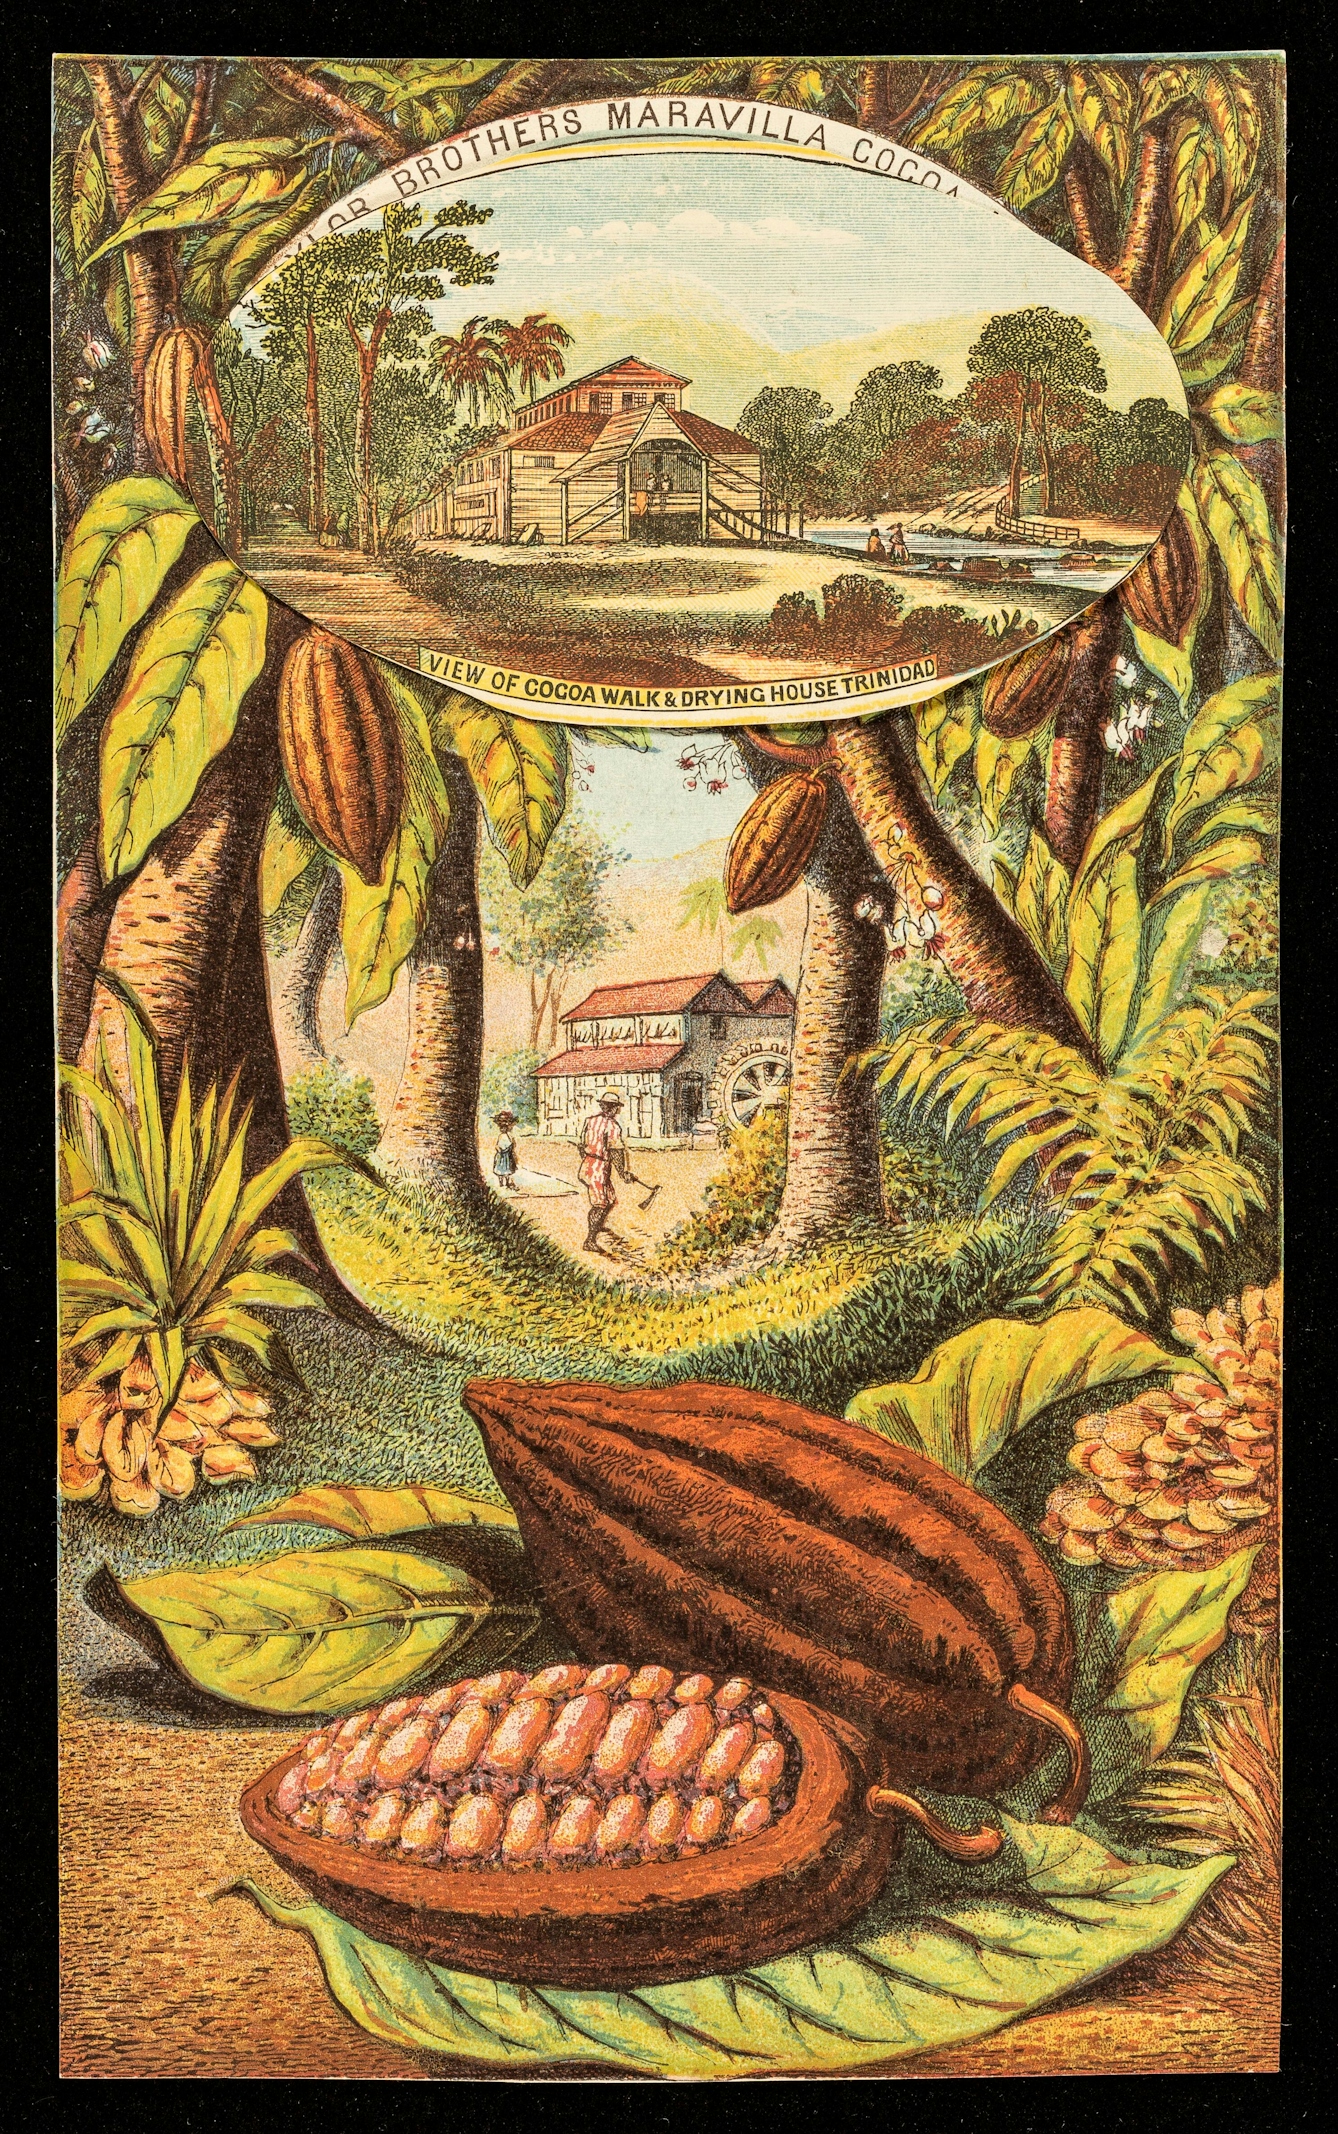 Colour advertisement for Taylor Brothers Maravilla Cocoa showing "view of cocoa walk and drying house, Trinidad" in the background. Cocoa beans are prominent in the foreground. There are only a few tiny people in the background images and they are in idealised scenes, strolling or sitting, with none of the violence that we know took place on plantations. 